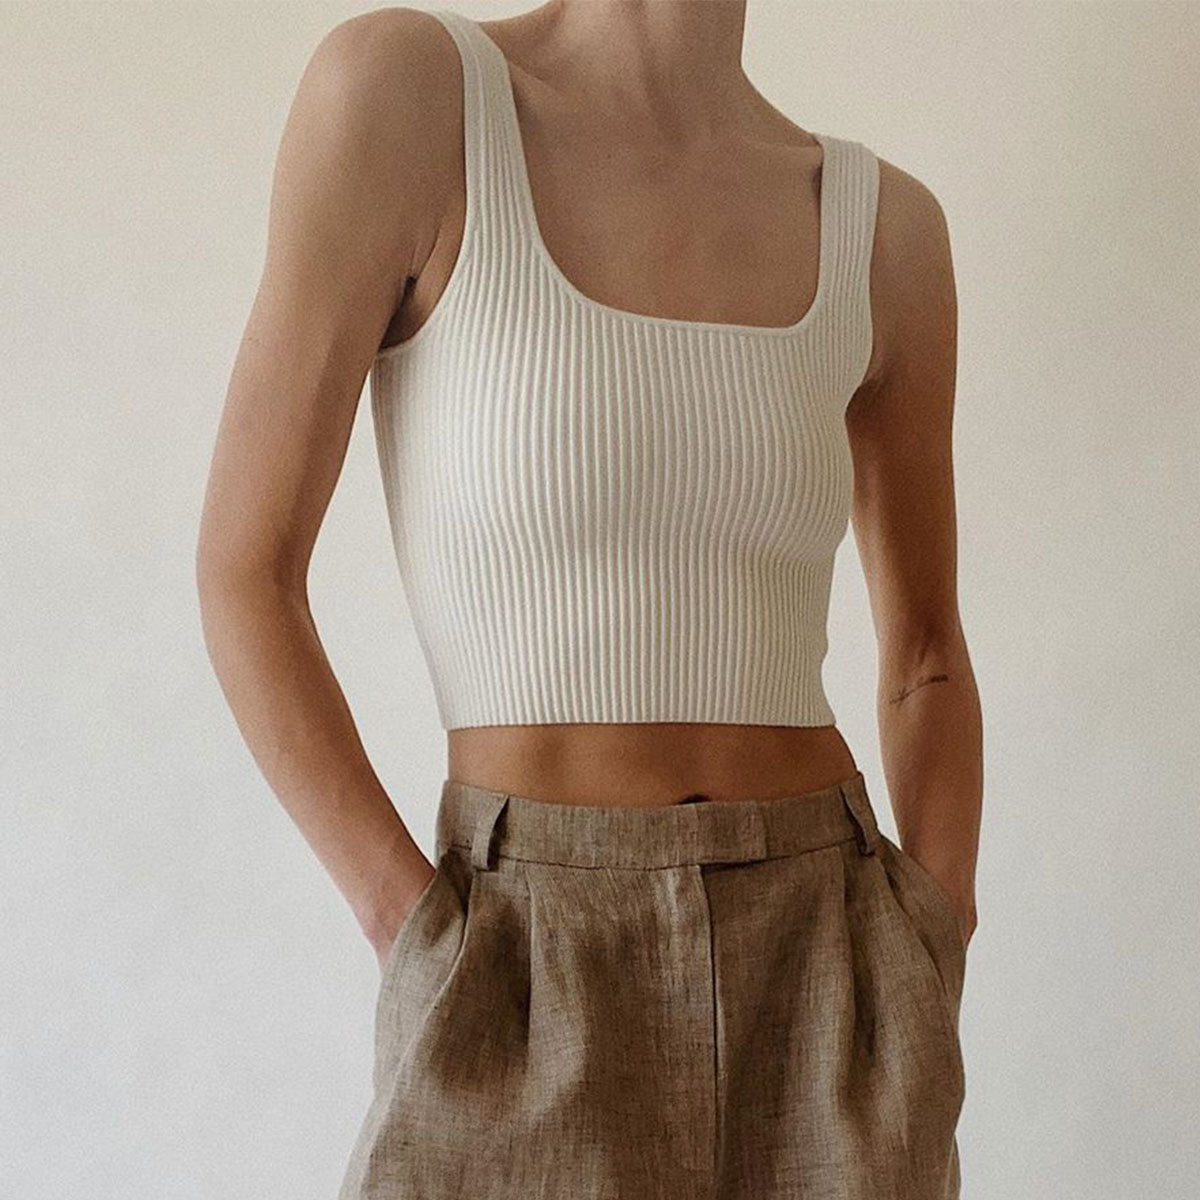 The 24 Best Cropped Tank Tops and How to Style Them